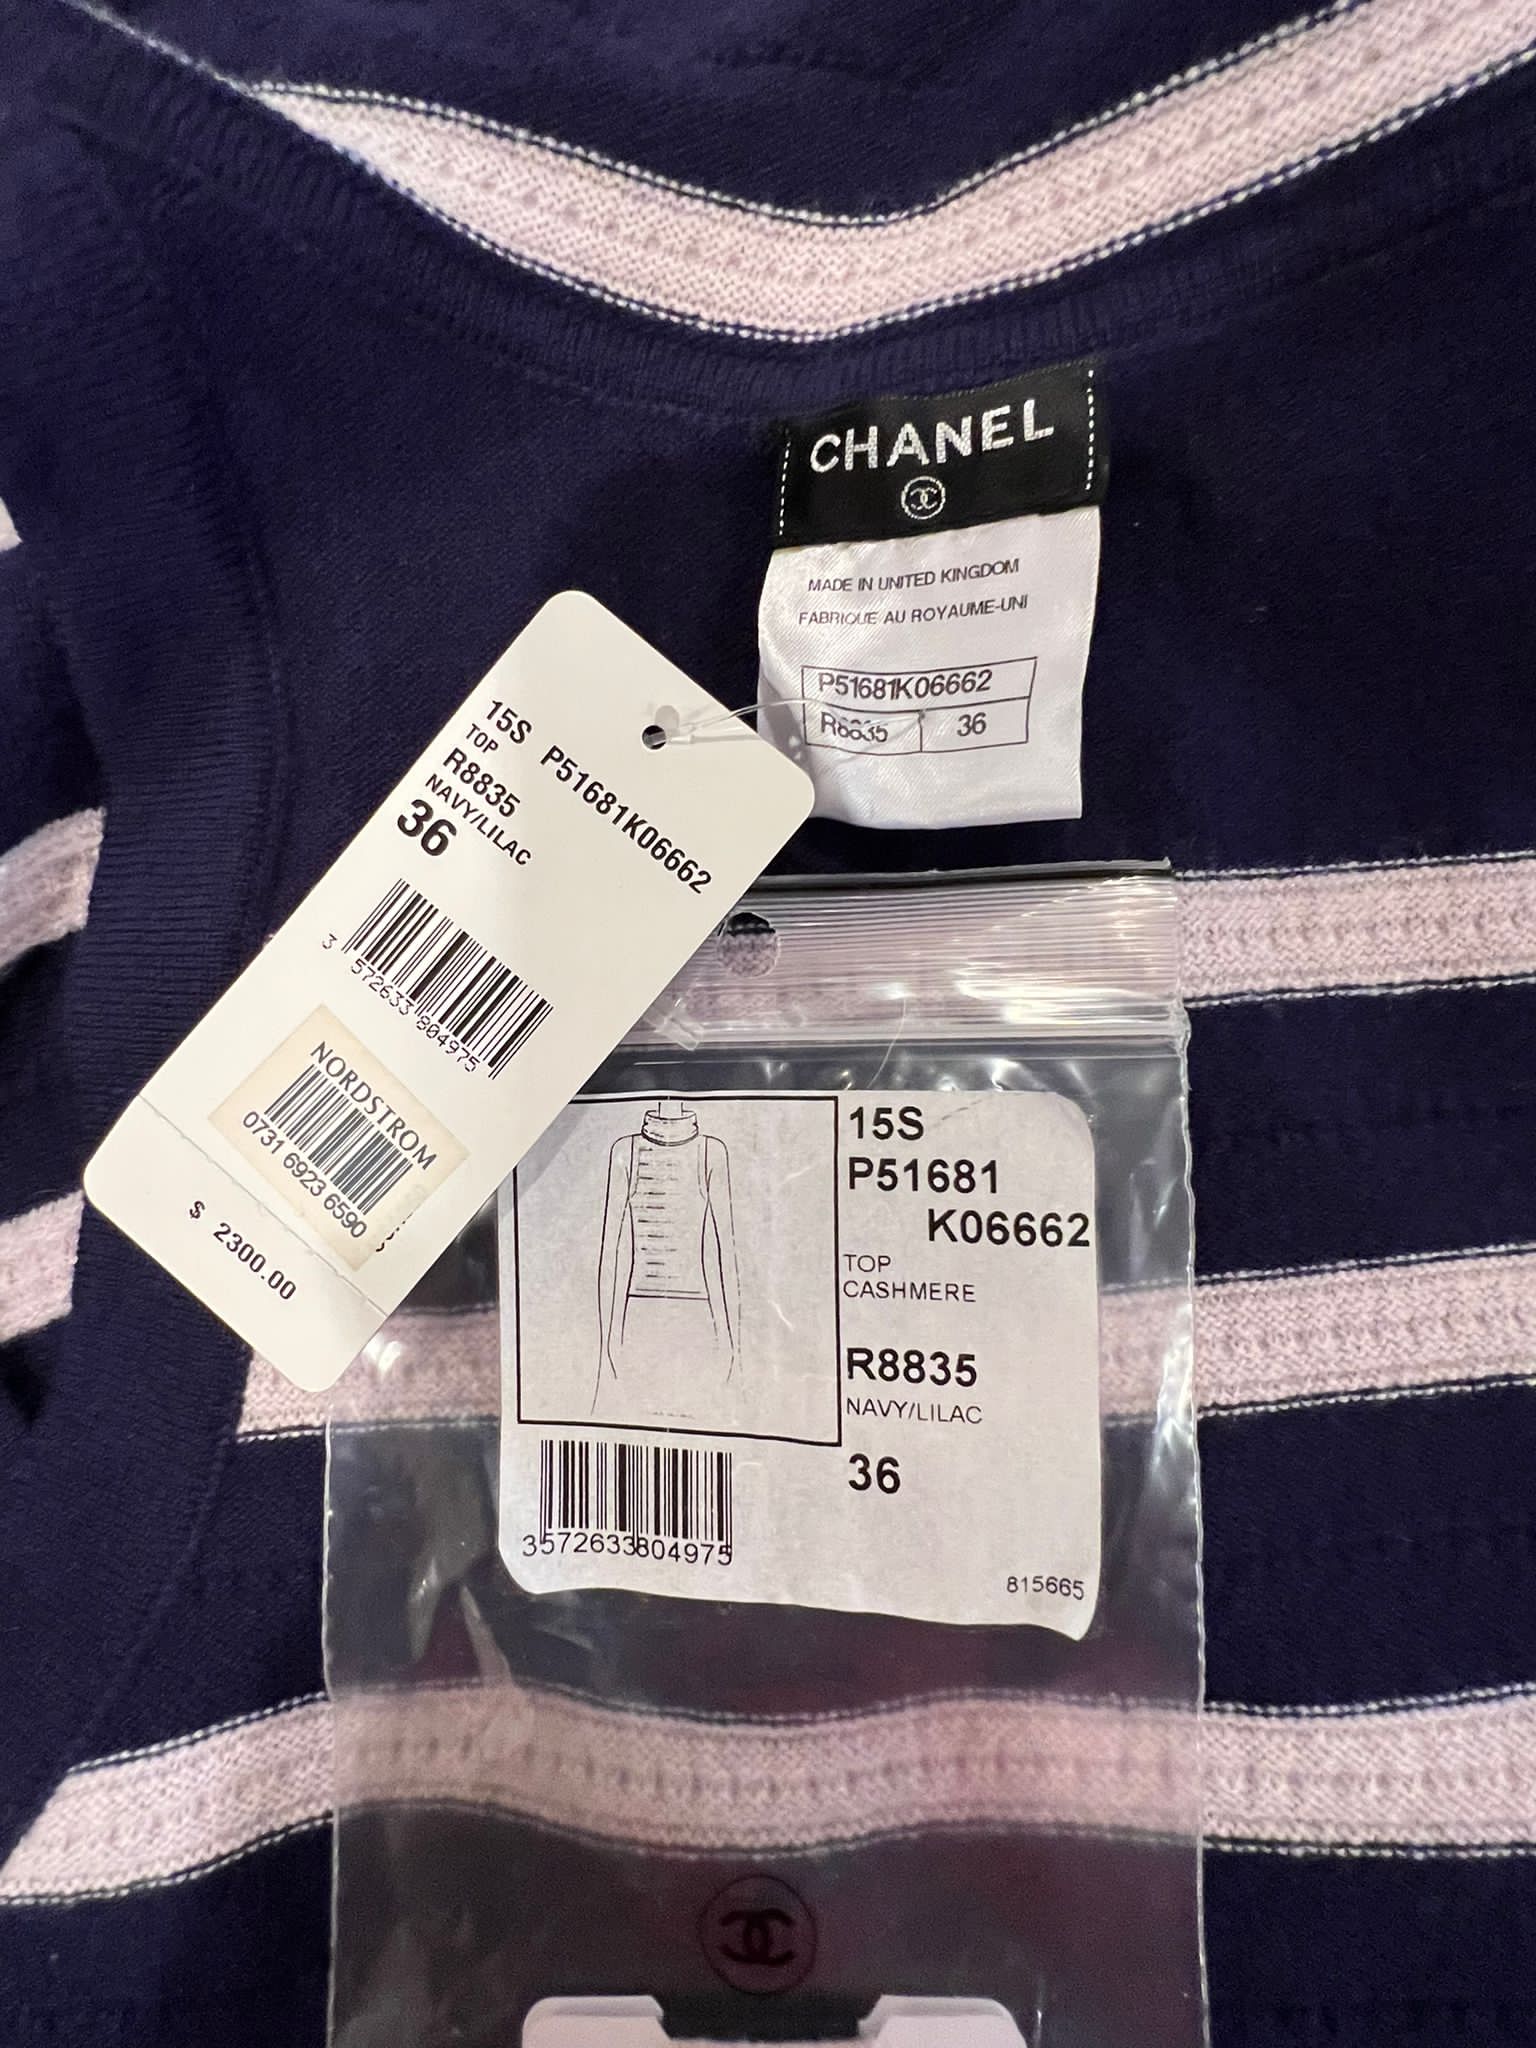 HelensChanel Nwt Chanel 15s 2015 Summer Cashmere Navy Blue Lilac Stripe Sleeveless Turtleneck Sweater Top Blouse FR 36 US 4